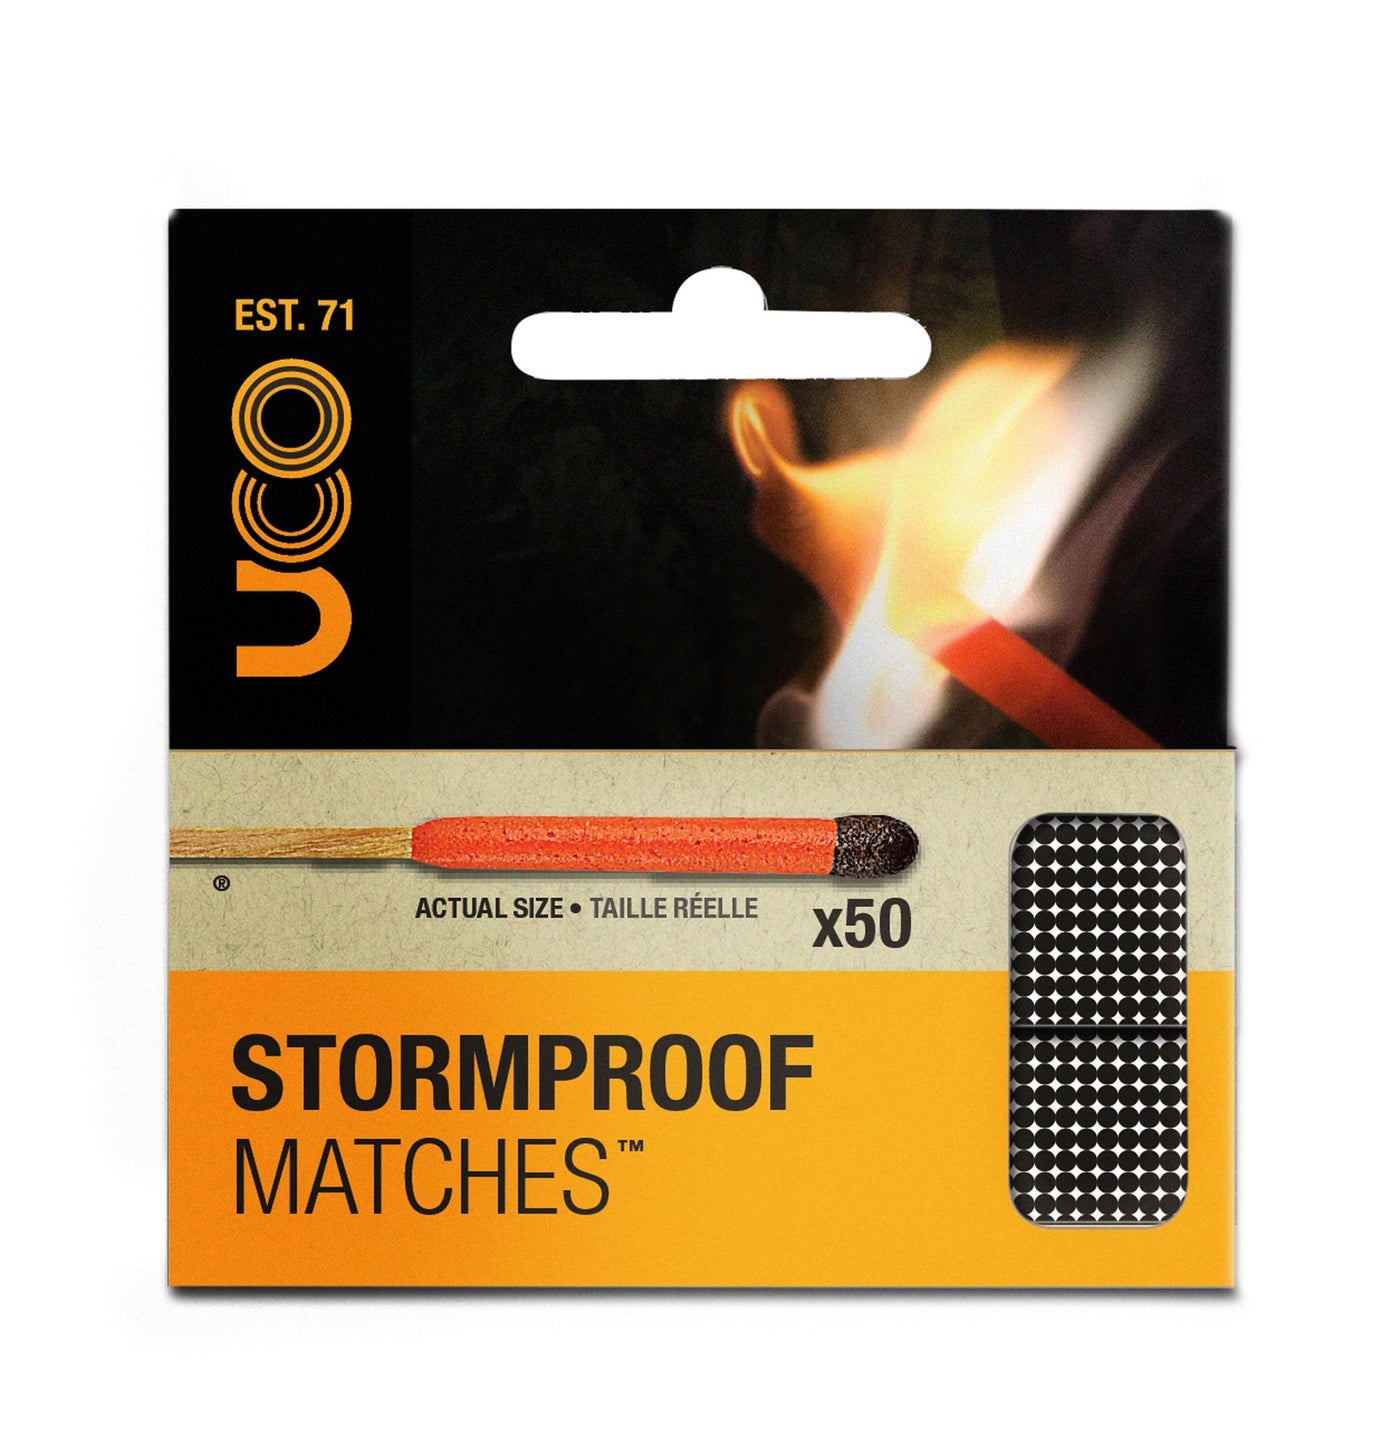 Uco Storm Proof Matches